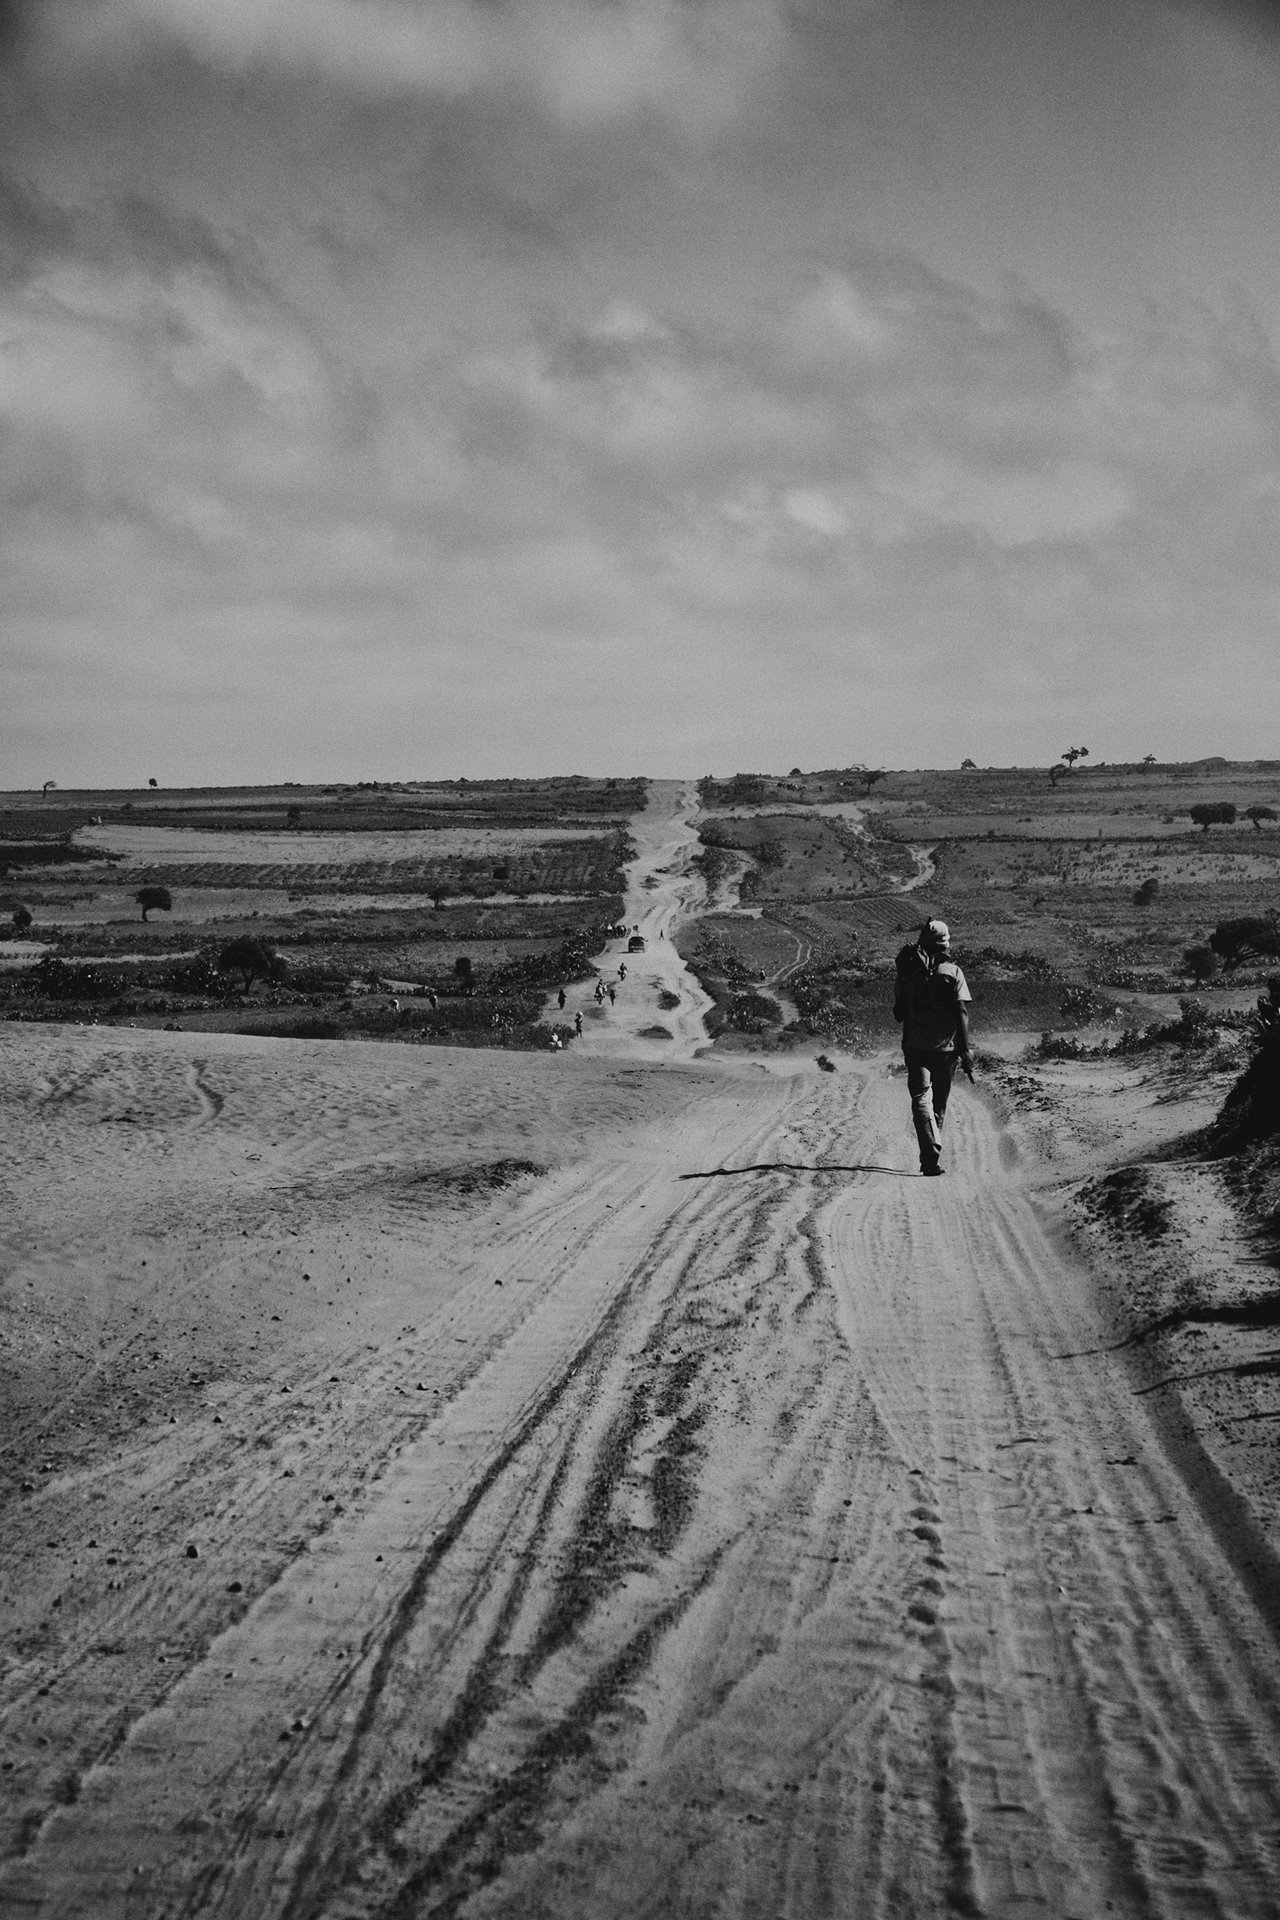 A man walks along the national road connecting Amboasary Sud and Ambovombe, in southern Madagascar. The region is isolated, and poor infrastructure hinders economic development. Economic deprivation and a food crisis in the region are thought to be factors in turning young men to cattle theft. The isolation and inadequate infrastructure are obstacles to controlling the crime.